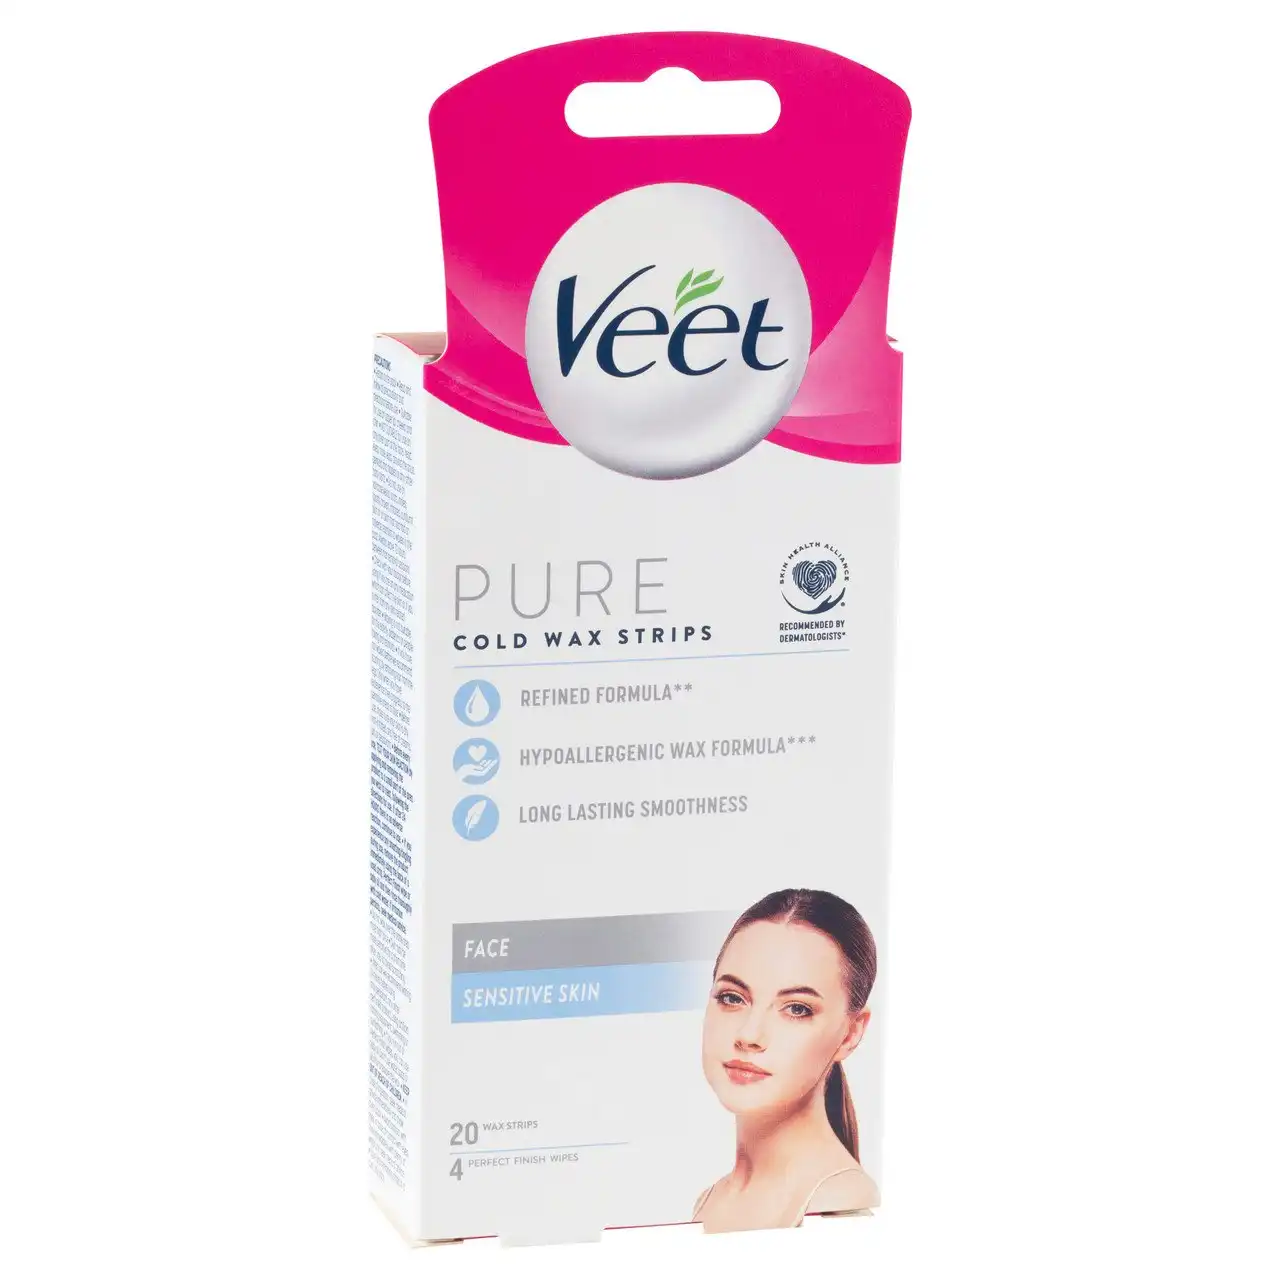 Veet Pure Hair Removal Cold Wax Strips Face Sensitive Skin 20 Pack